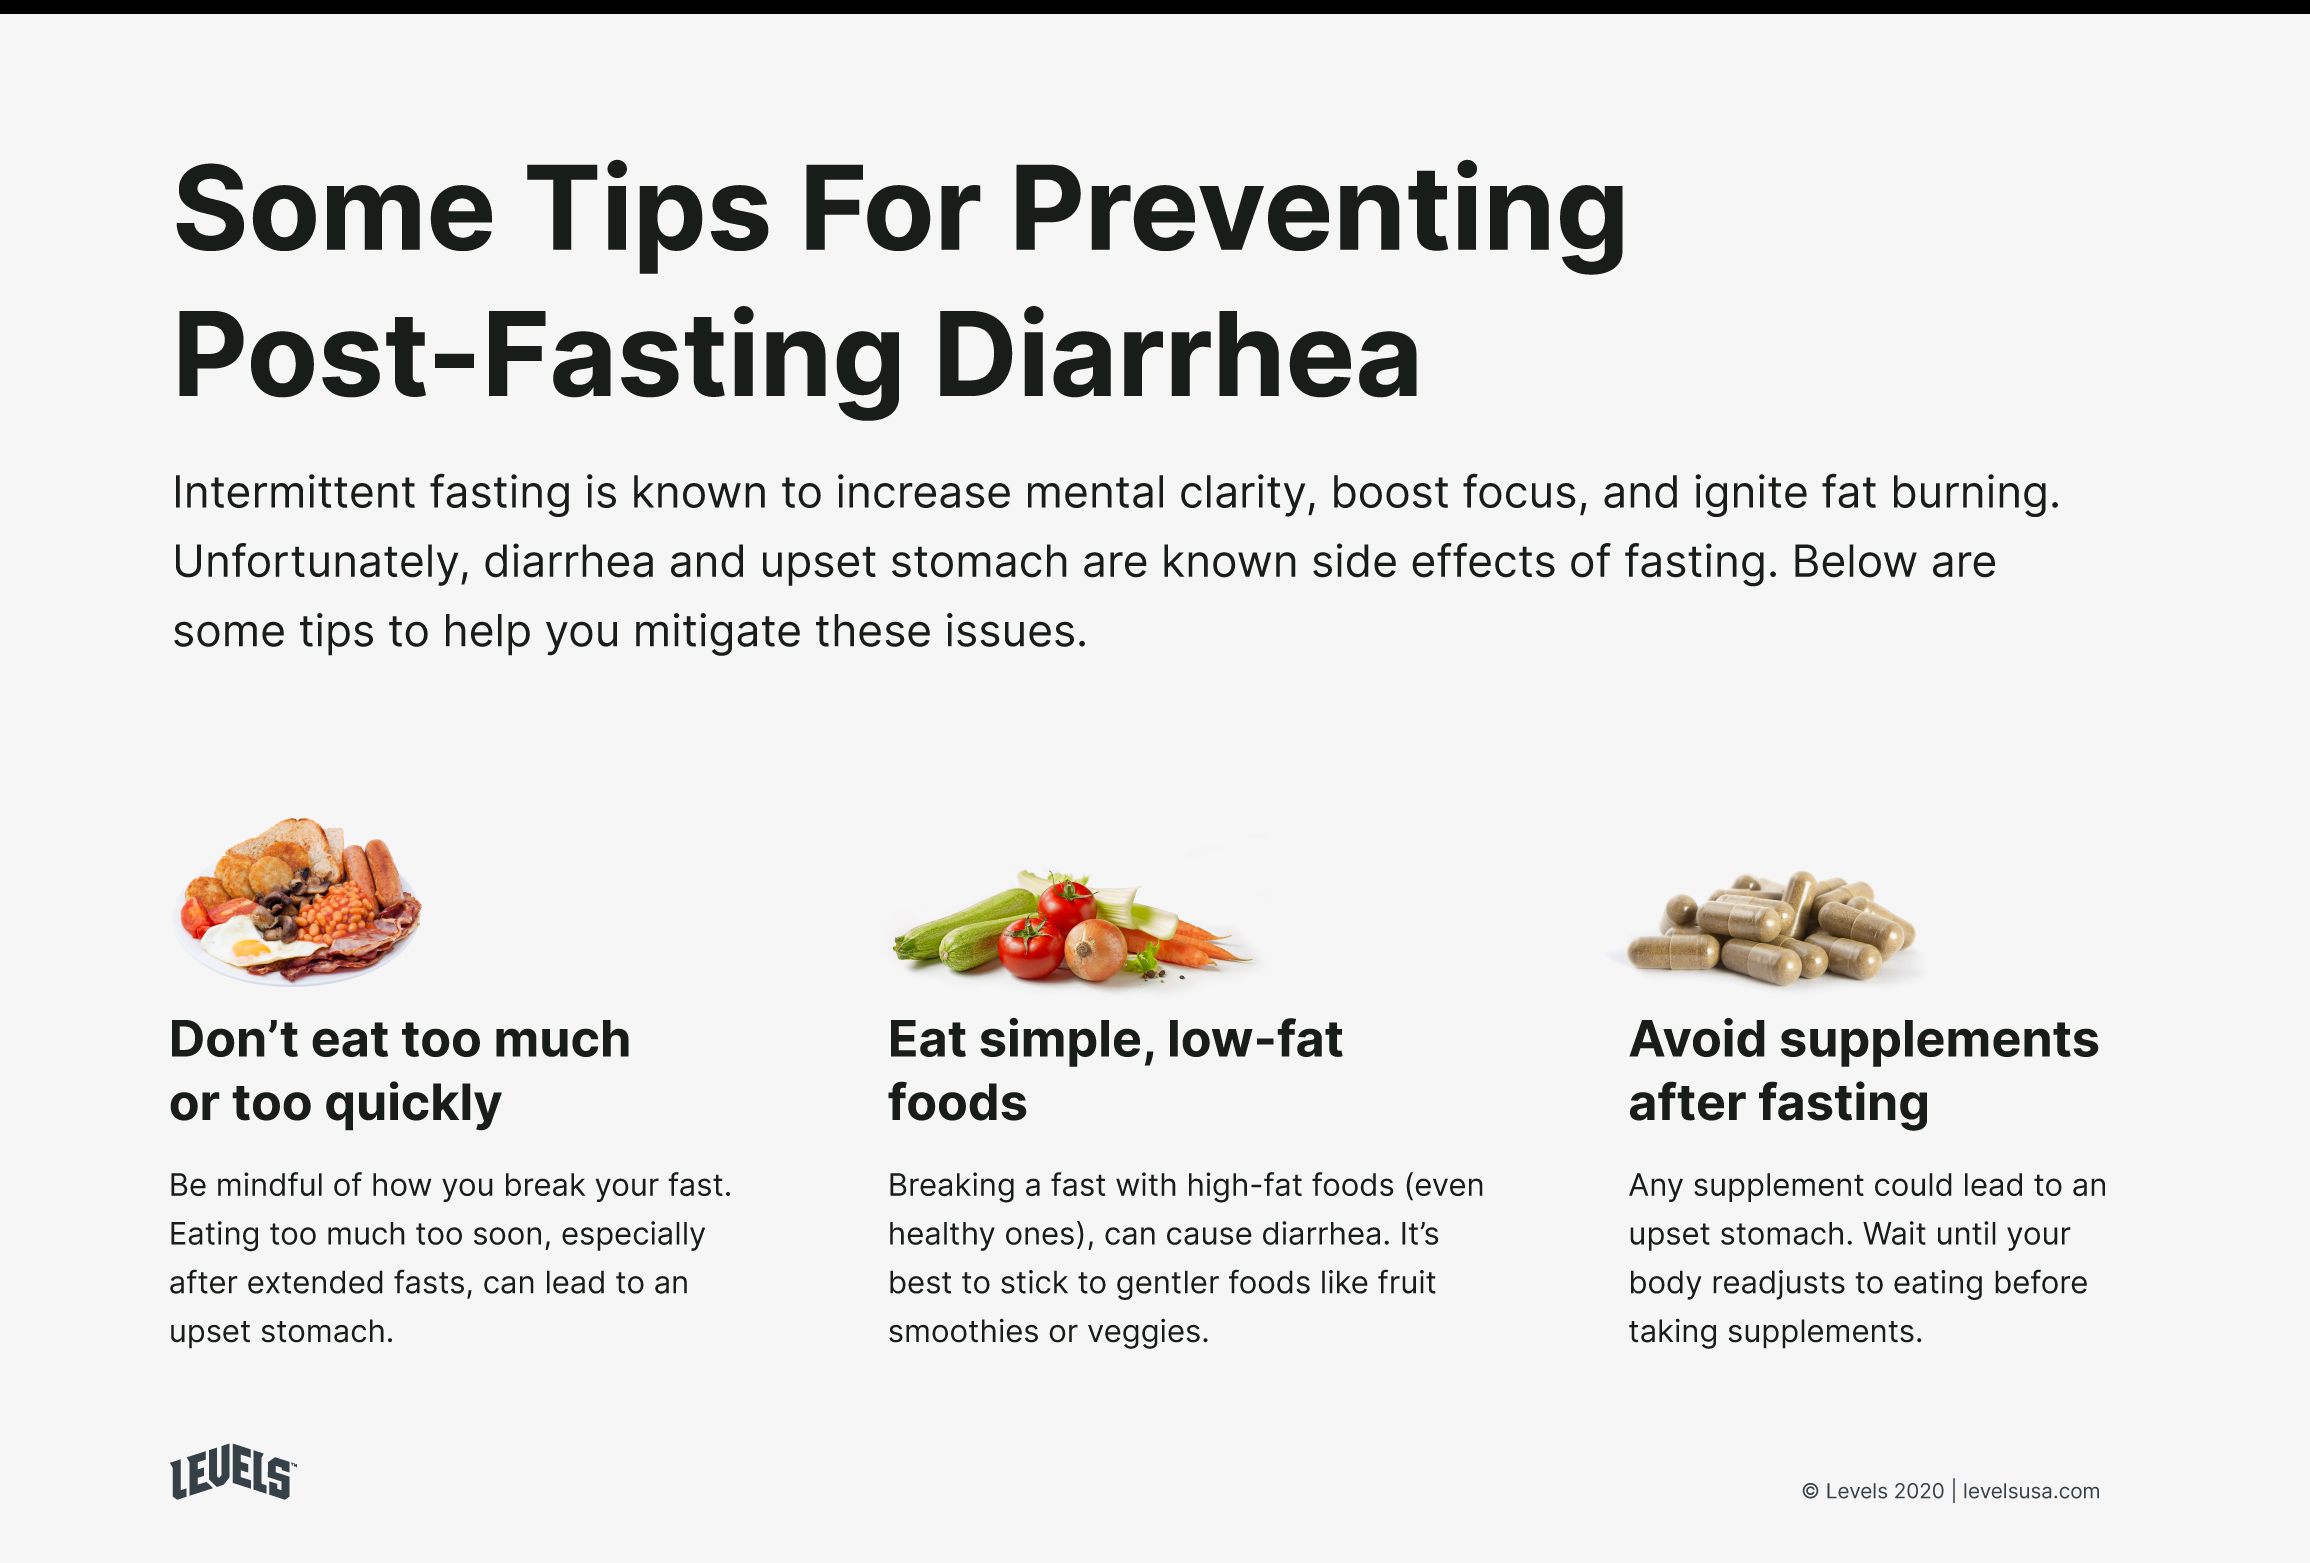 How To Prevent Post-Fasting Diarrhea - Infographic